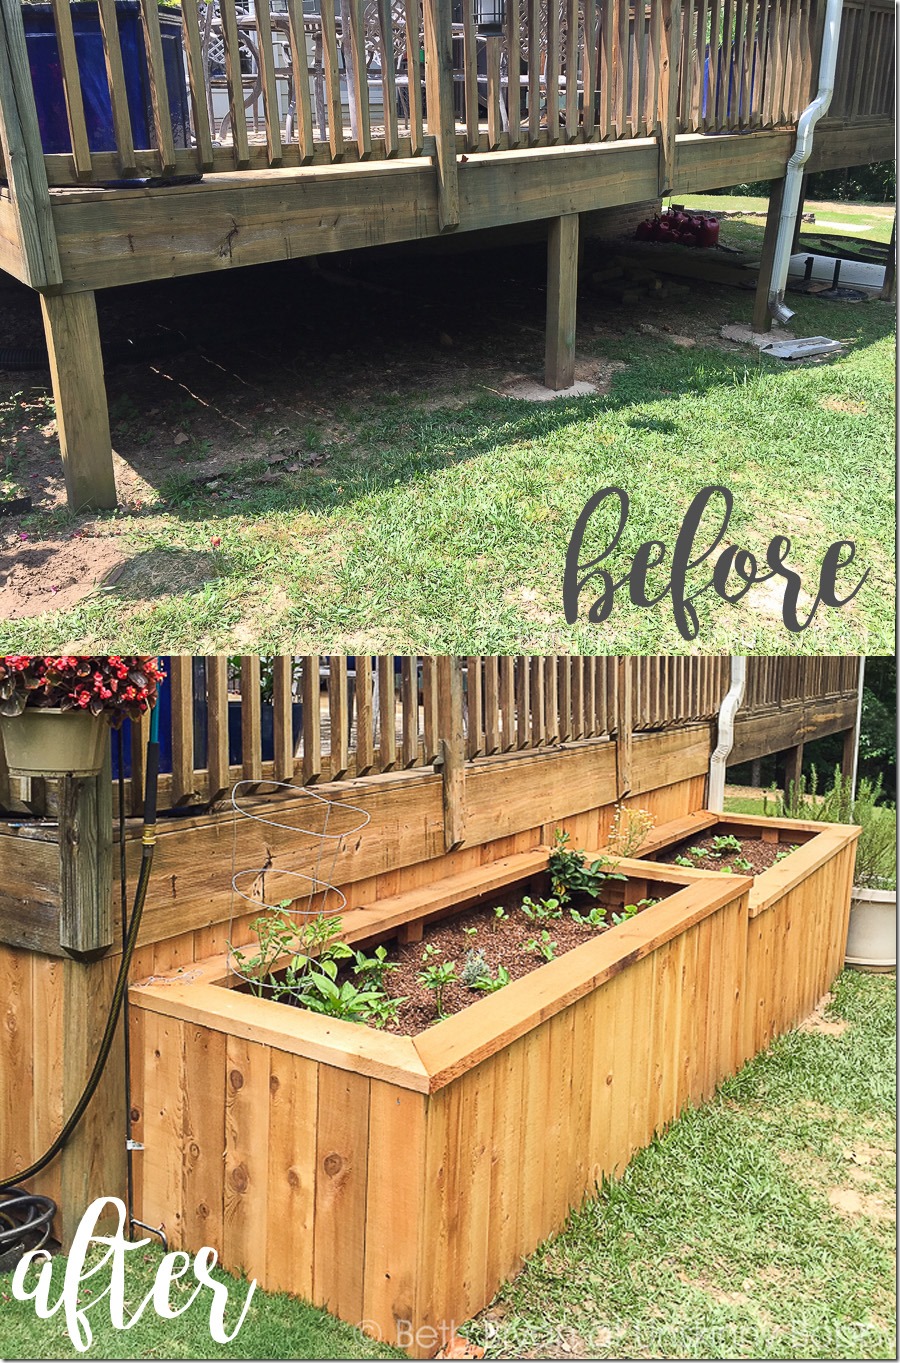 A Backyard Makeover With Raised Garden Beds Unskinny Boppy